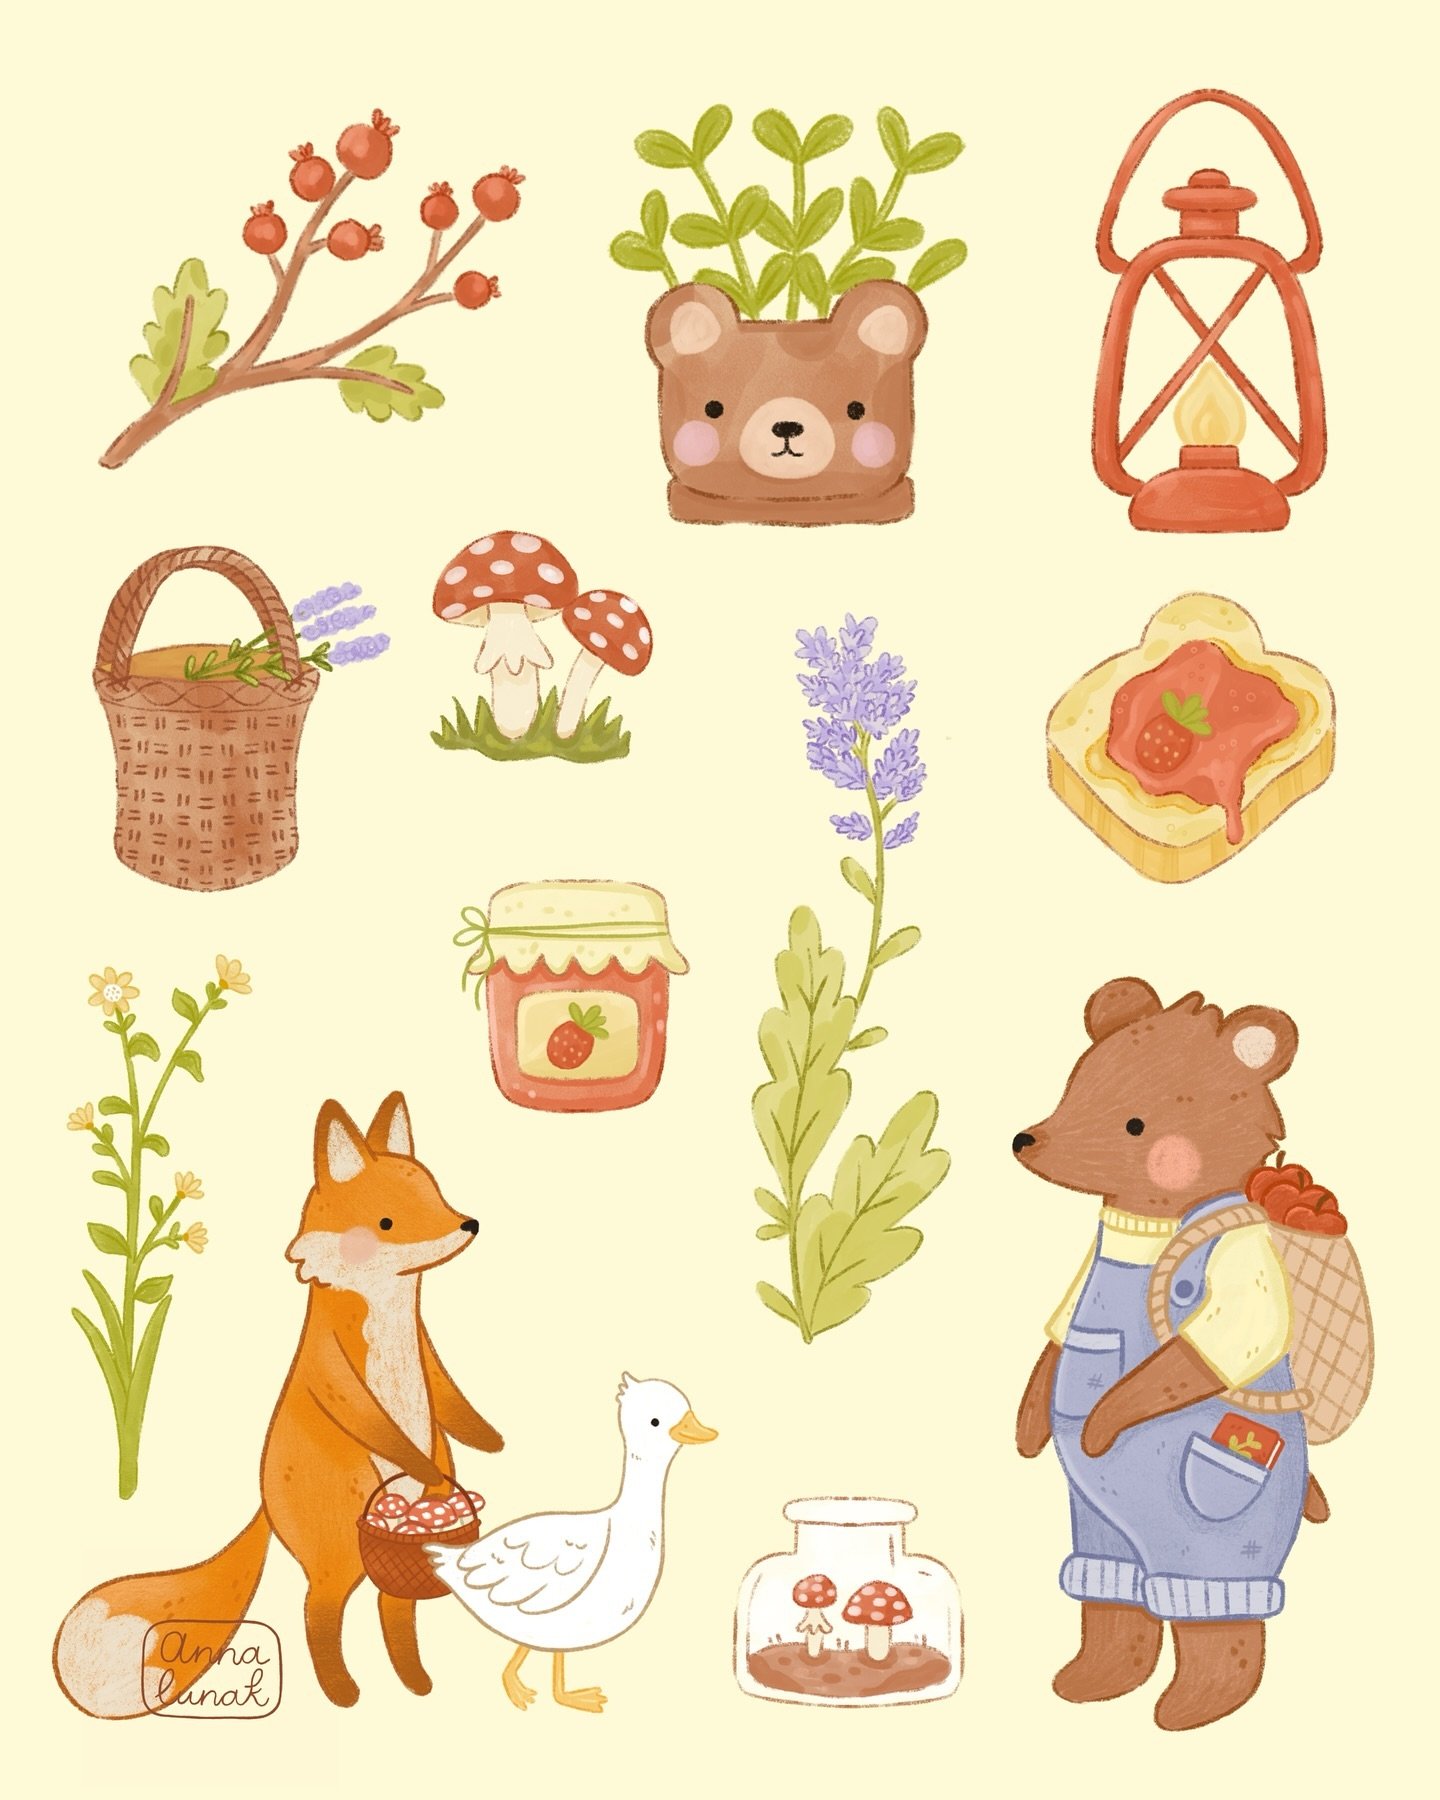 Love this one from the Mail Club last June 🌸

I was experimenting that time with drawing sticker sheets in another way so that I can finish them faster and I really really like how the items and plants turned out in this illustration! 🧡

Do you pre